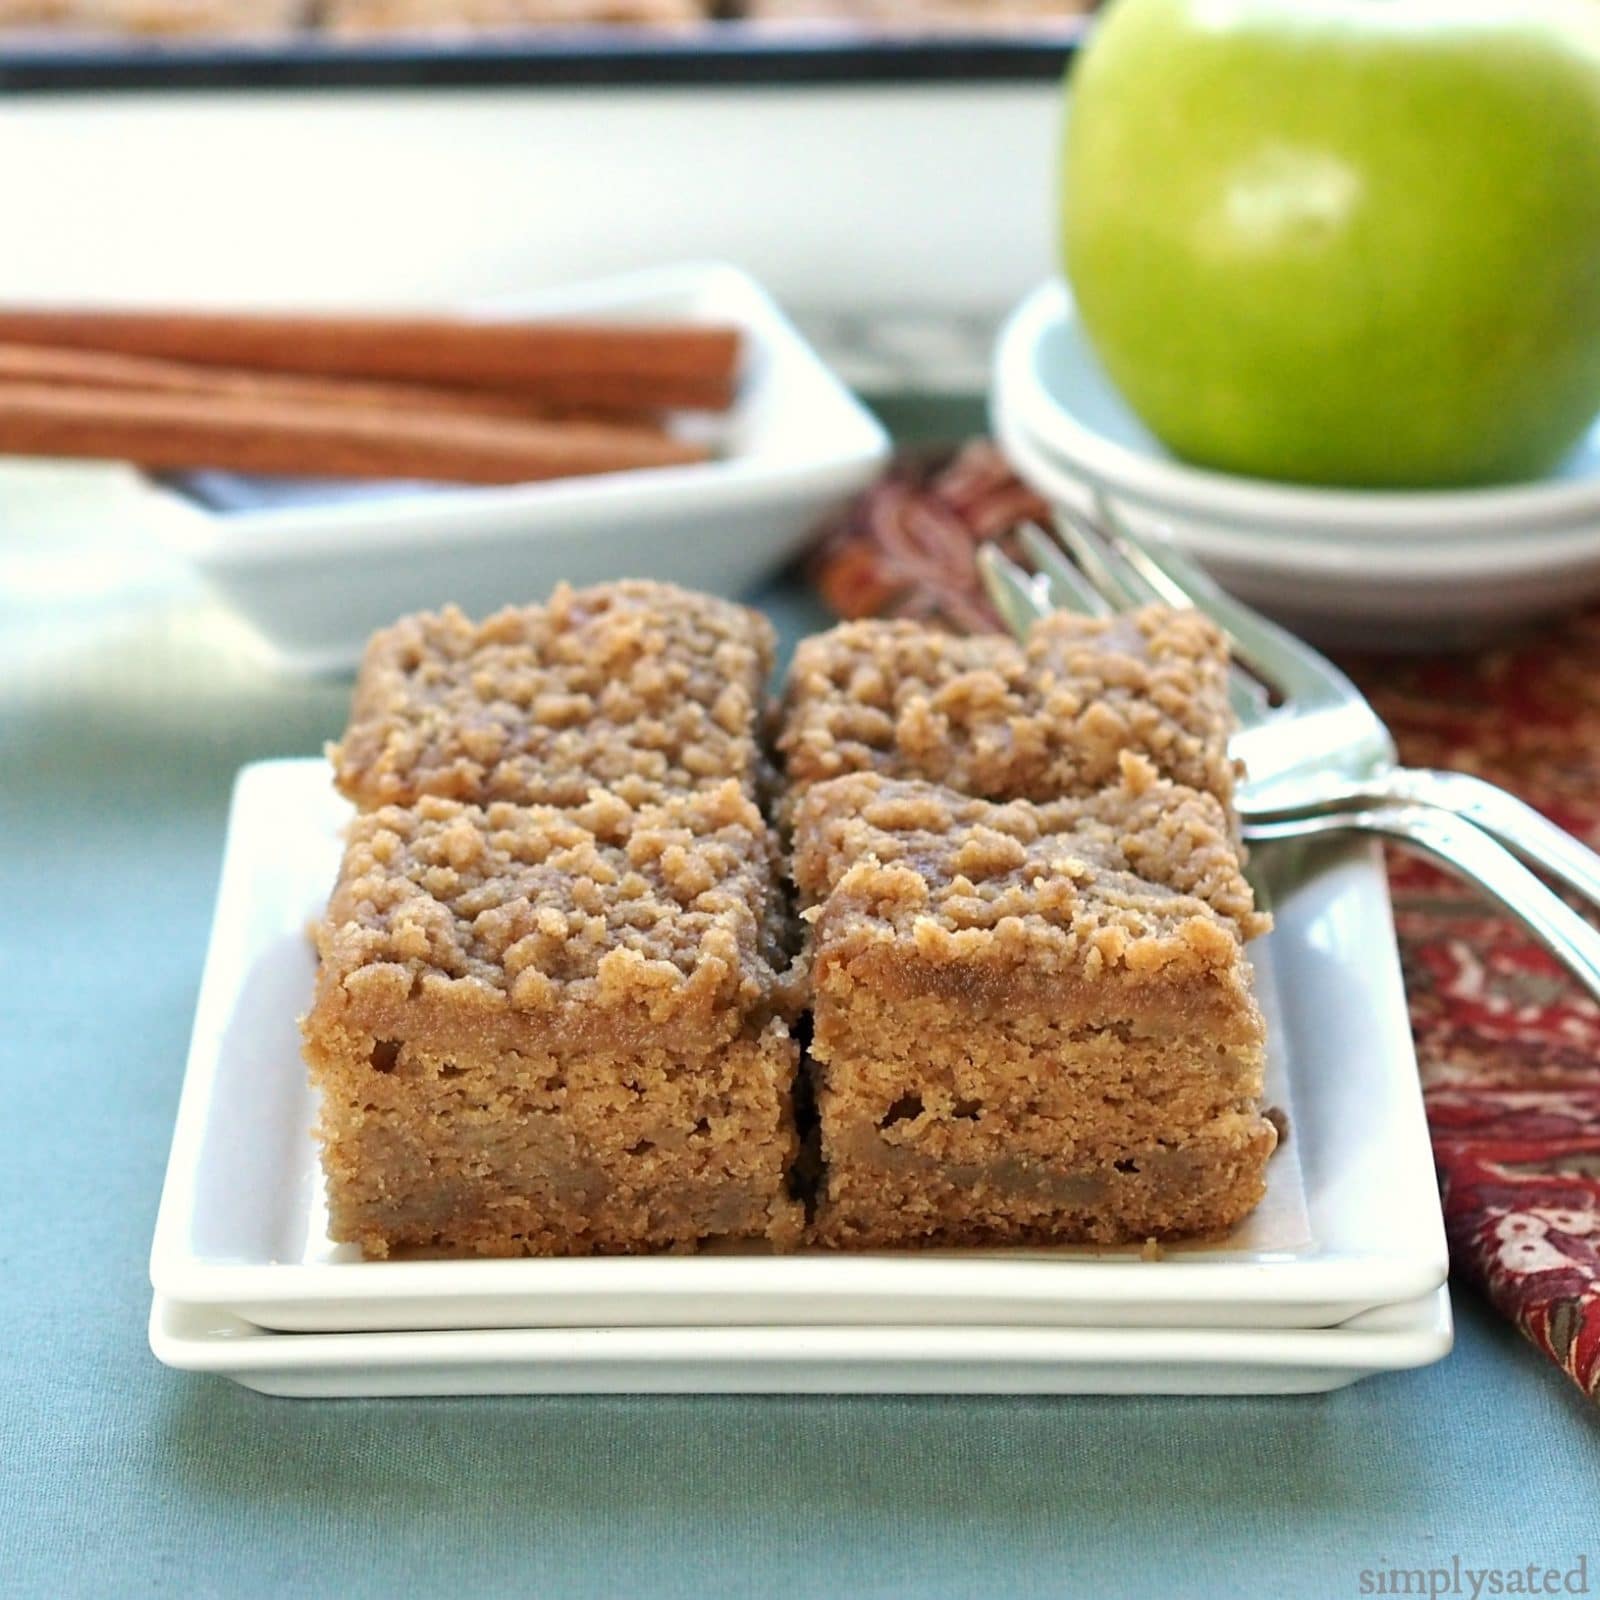 Apple Brown Sugar Coffee Cake is everything a great coffee cake should be - moist and filled with flavor. simply sated